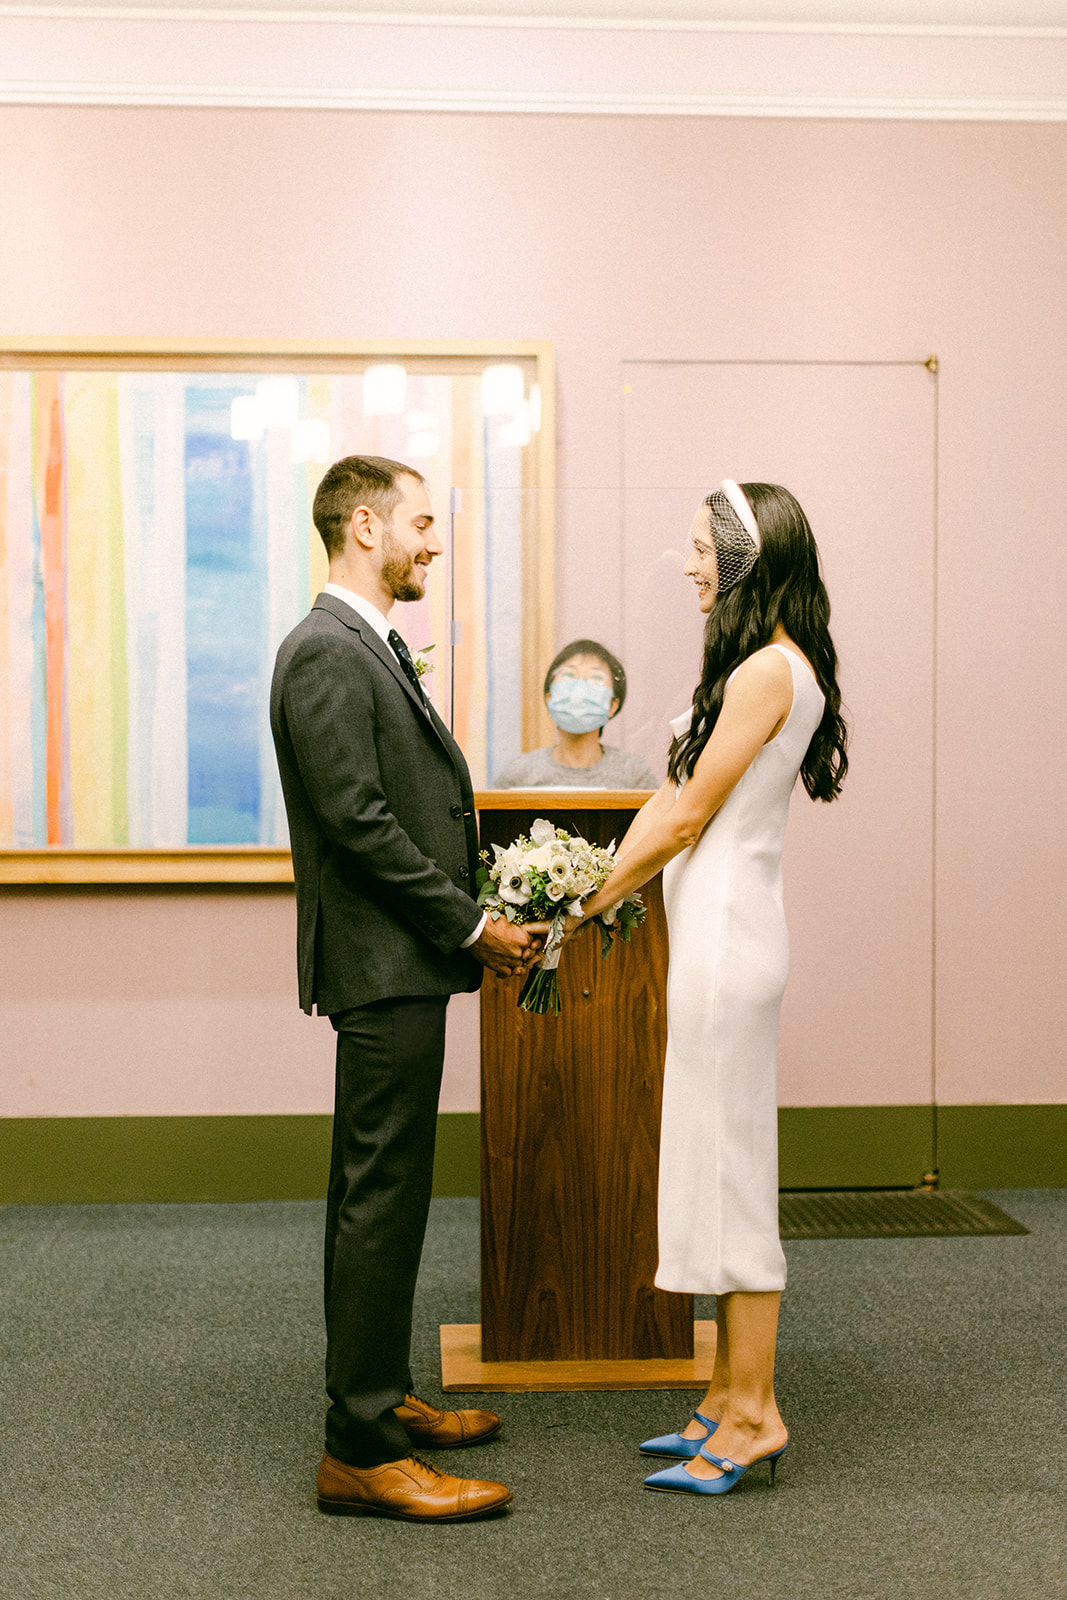 https://weddingsbynato.com/an-intimate-elopement-at-nyc-city-hall/